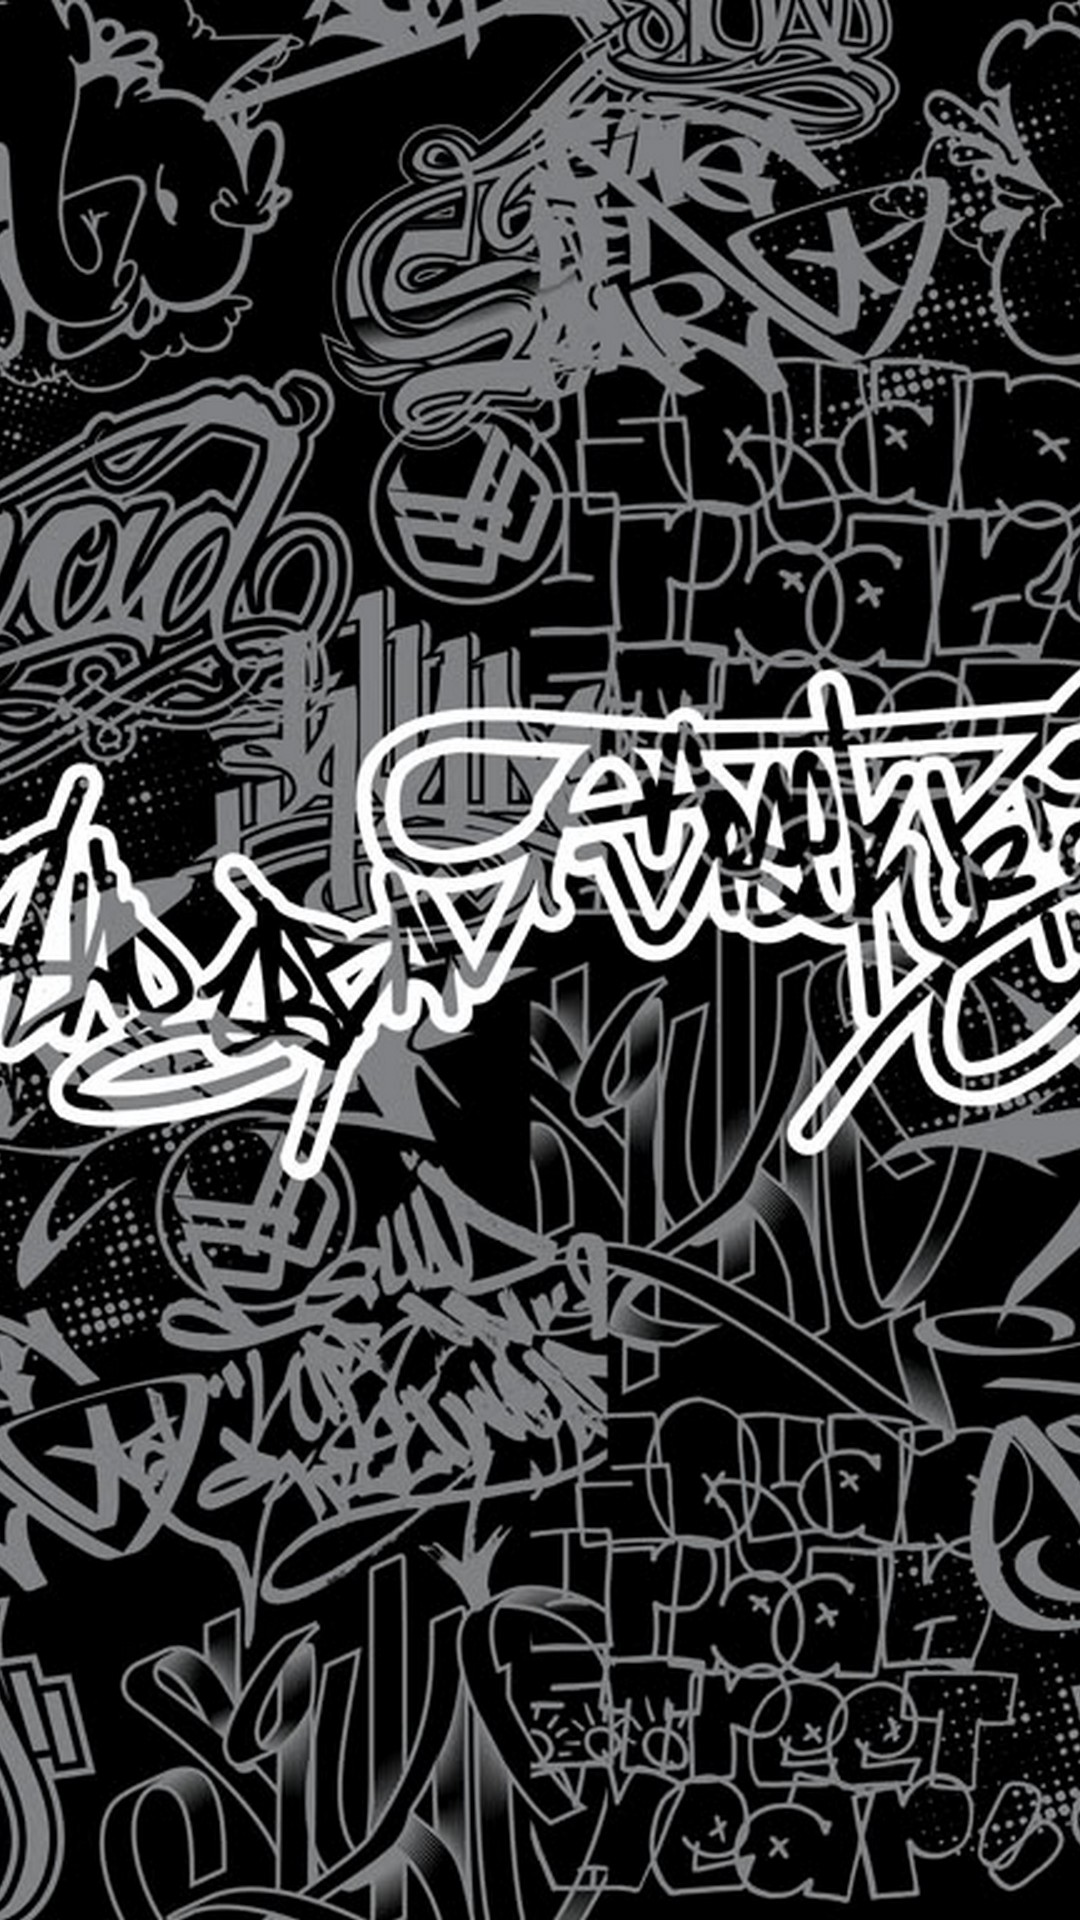 Graffiti Letters iPhone Wallpaper with resolution 1080X1920 pixel. You can make this wallpaper for your iPhone 5, 6, 7, 8, X backgrounds, Mobile Screensaver, or iPad Lock Screen